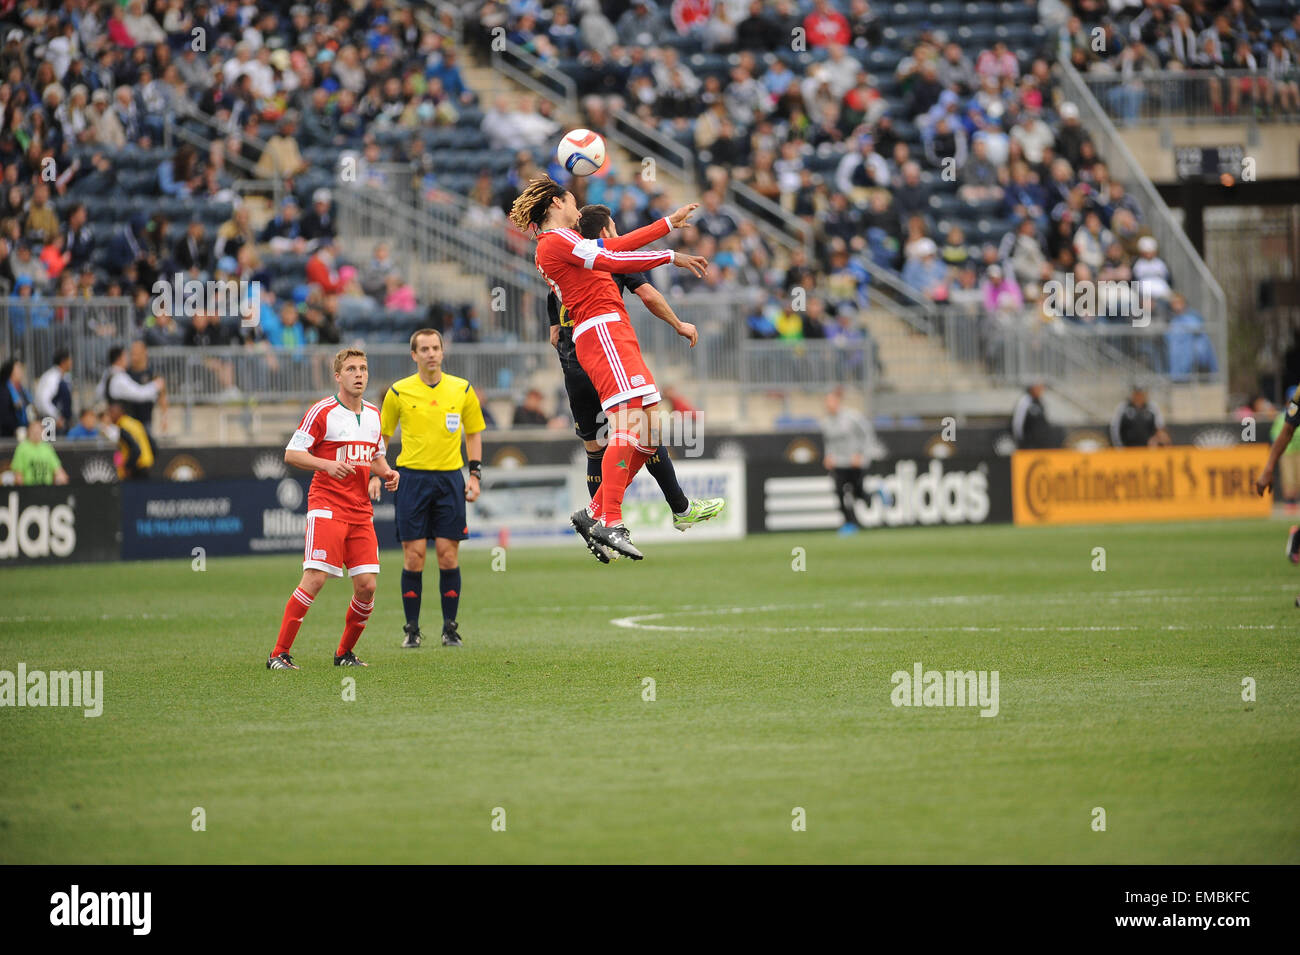 Chester, Pennsylvania, USA. 19th Apr, 2015. New England Revolution's midfielder, JERMAINE JONES (13) goes for the ball against the UnionThe Revolution beat the Union 2-1 at PPL Park in Chester Pa Credit:  Ricky Fitchett/ZUMA Wire/Alamy Live News Stock Photo